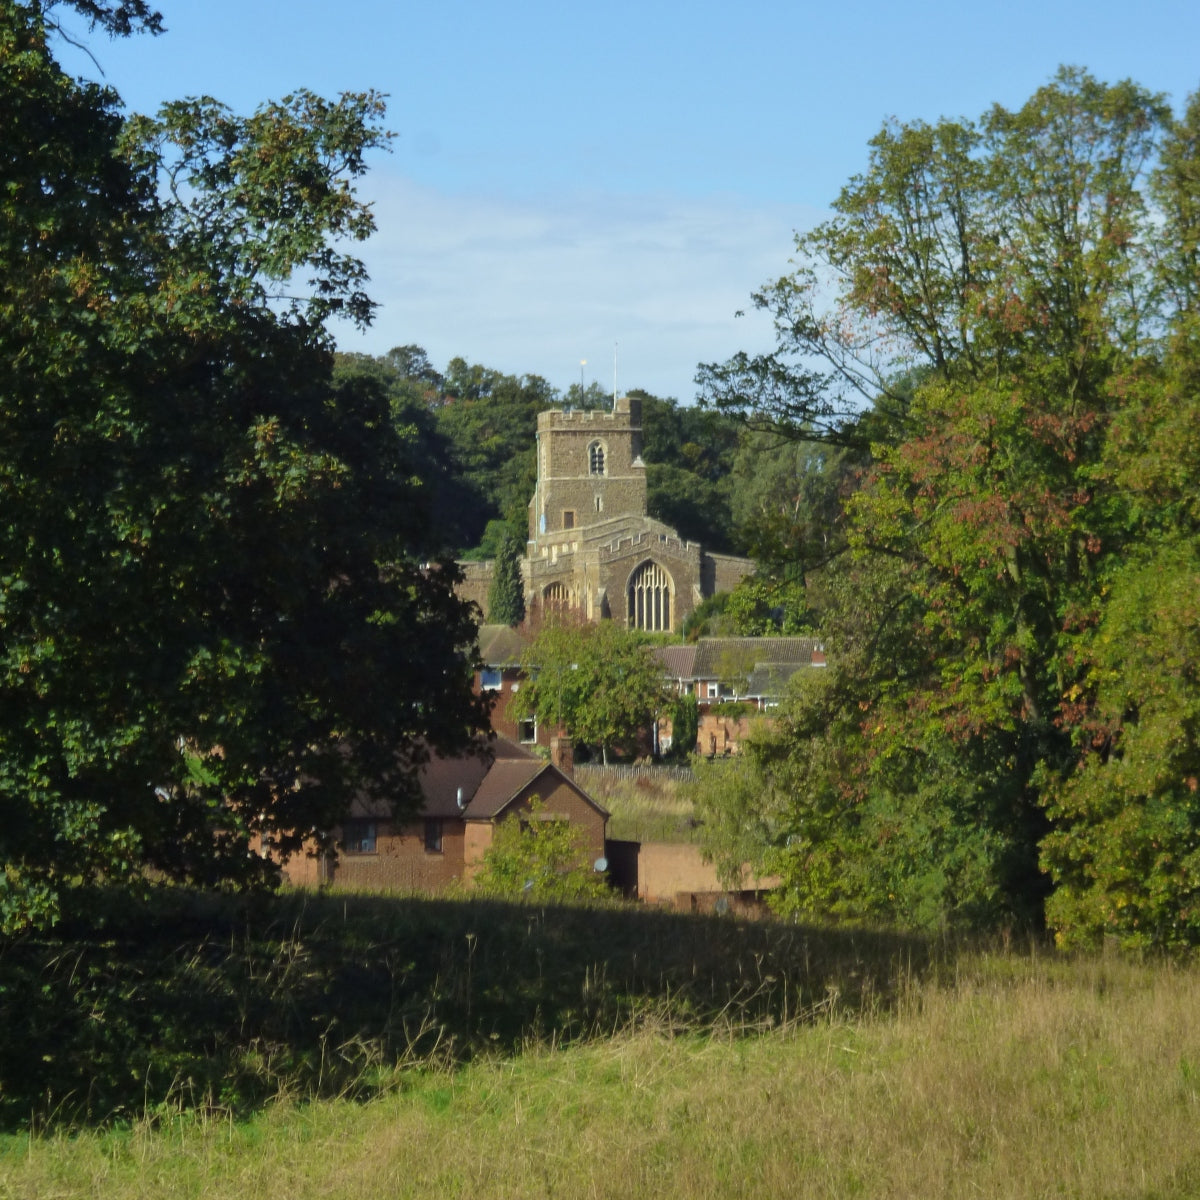 The view of Ampthill church